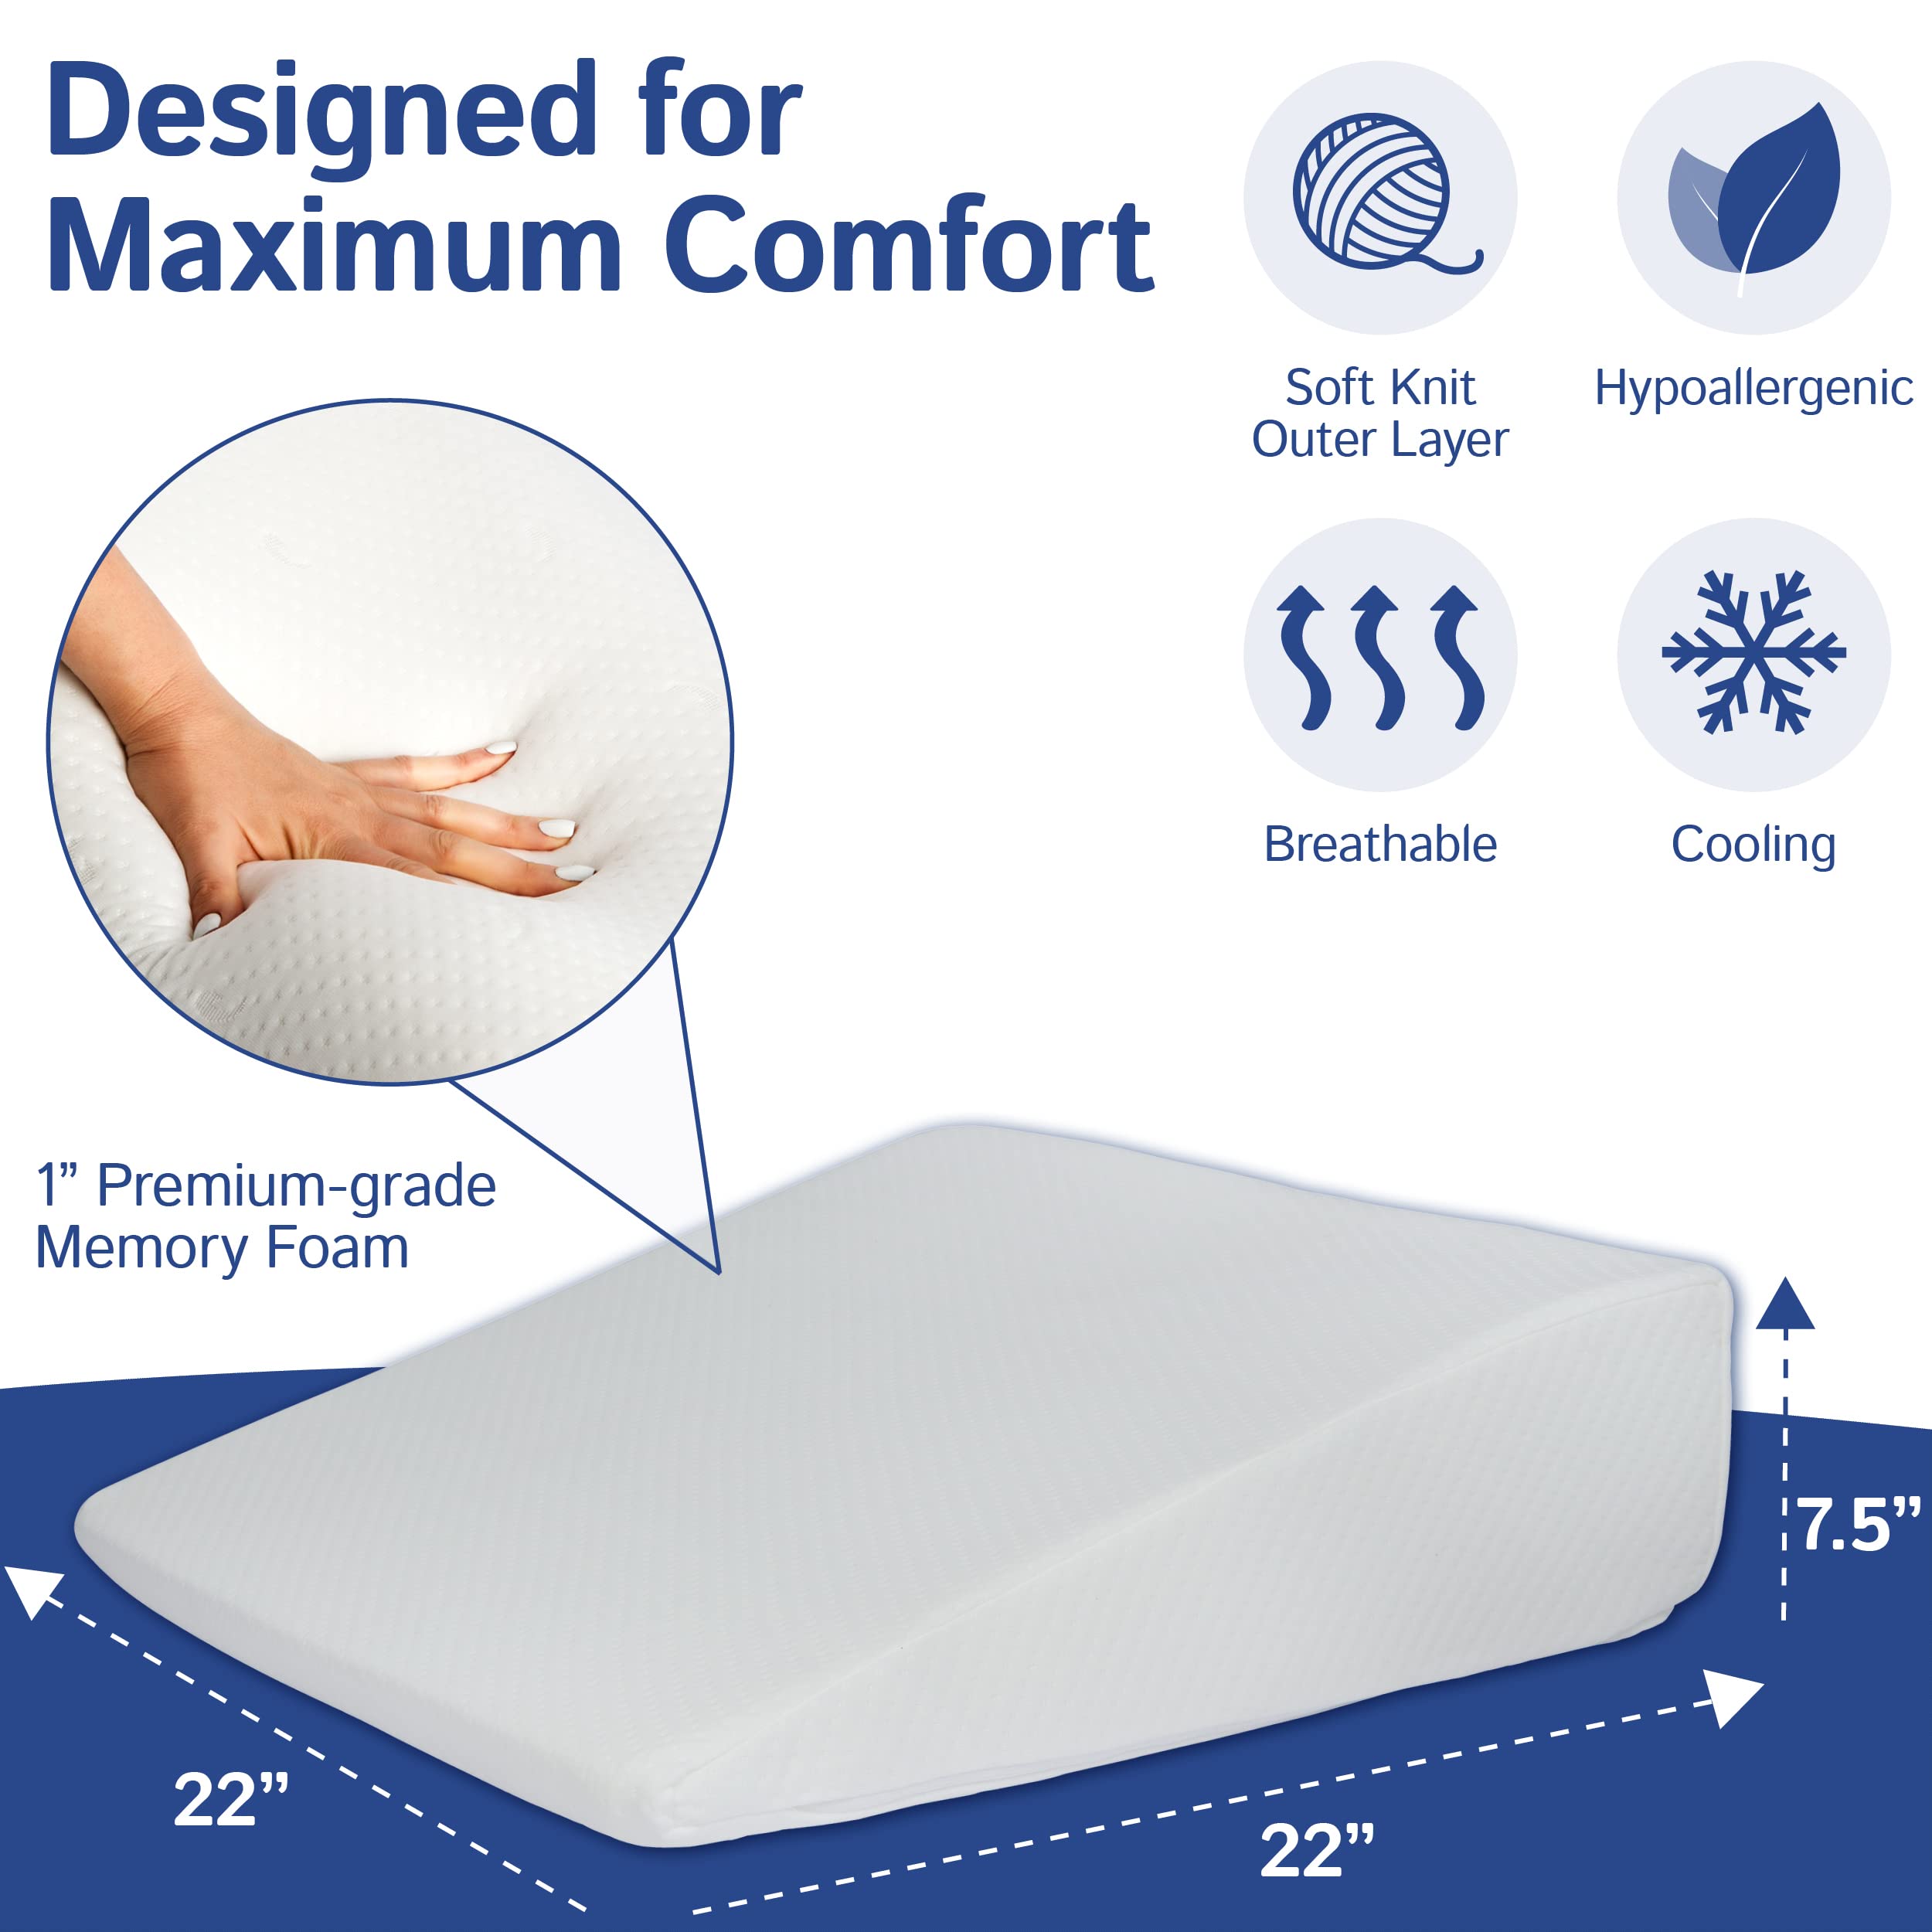 Bed Wedge Pillow With Memory Foam Top 7.5in - Ideal For Comfortable, Restful Sleeping - Wedge Pillow Neck & Back Pain Relief, Acid Reflux, Snoring, Heartburn, Allergies - Versatile & Washable Cover  - Very Good